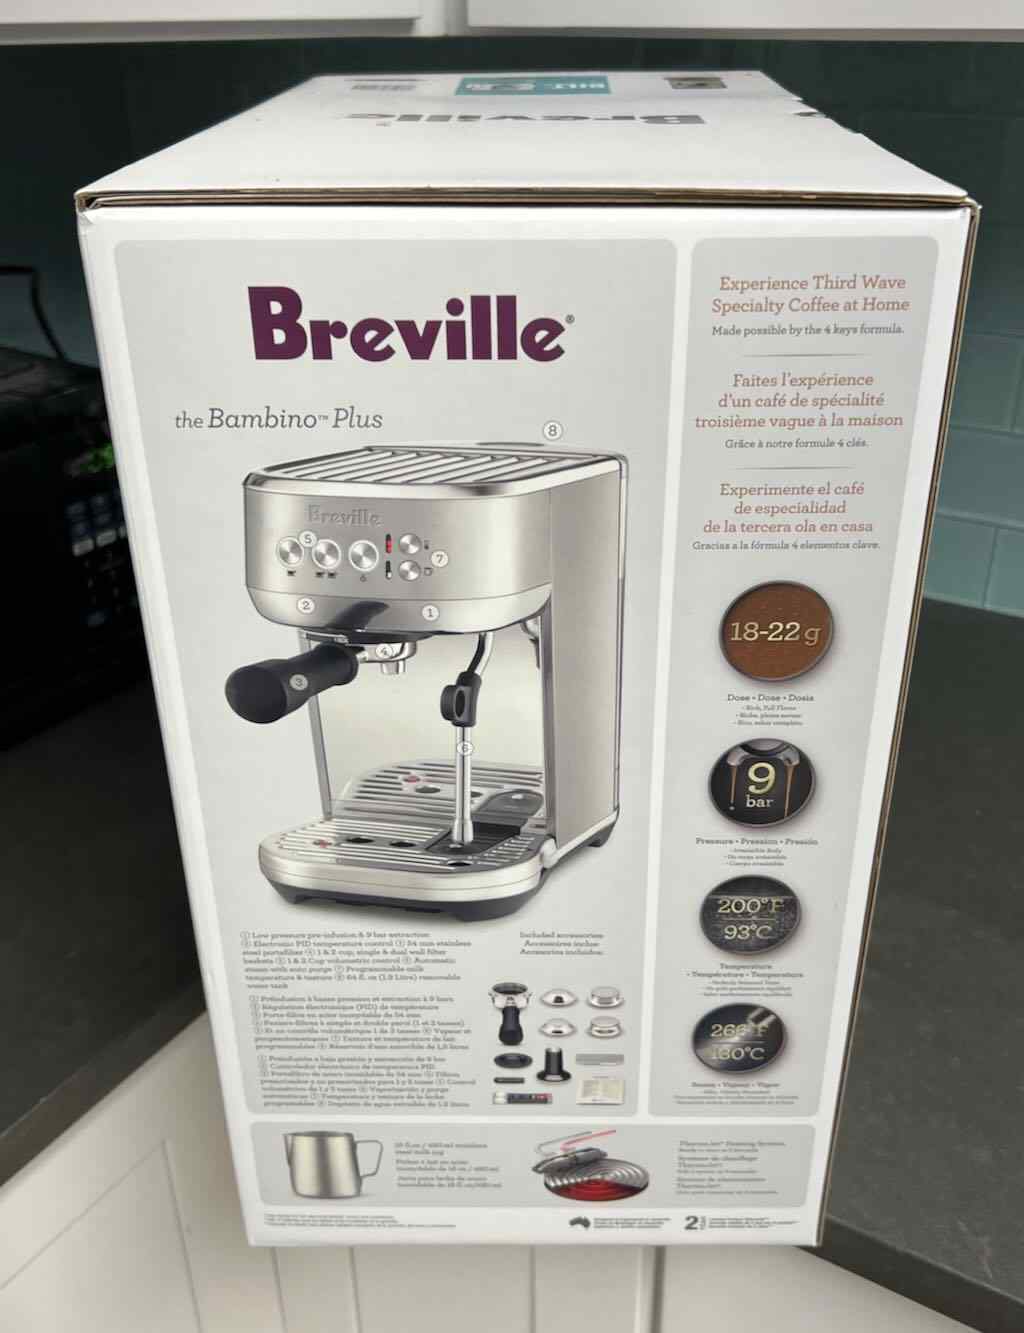 Breville Bambino Espresso Machine,47 Fluid Ounces, Stainless Steel